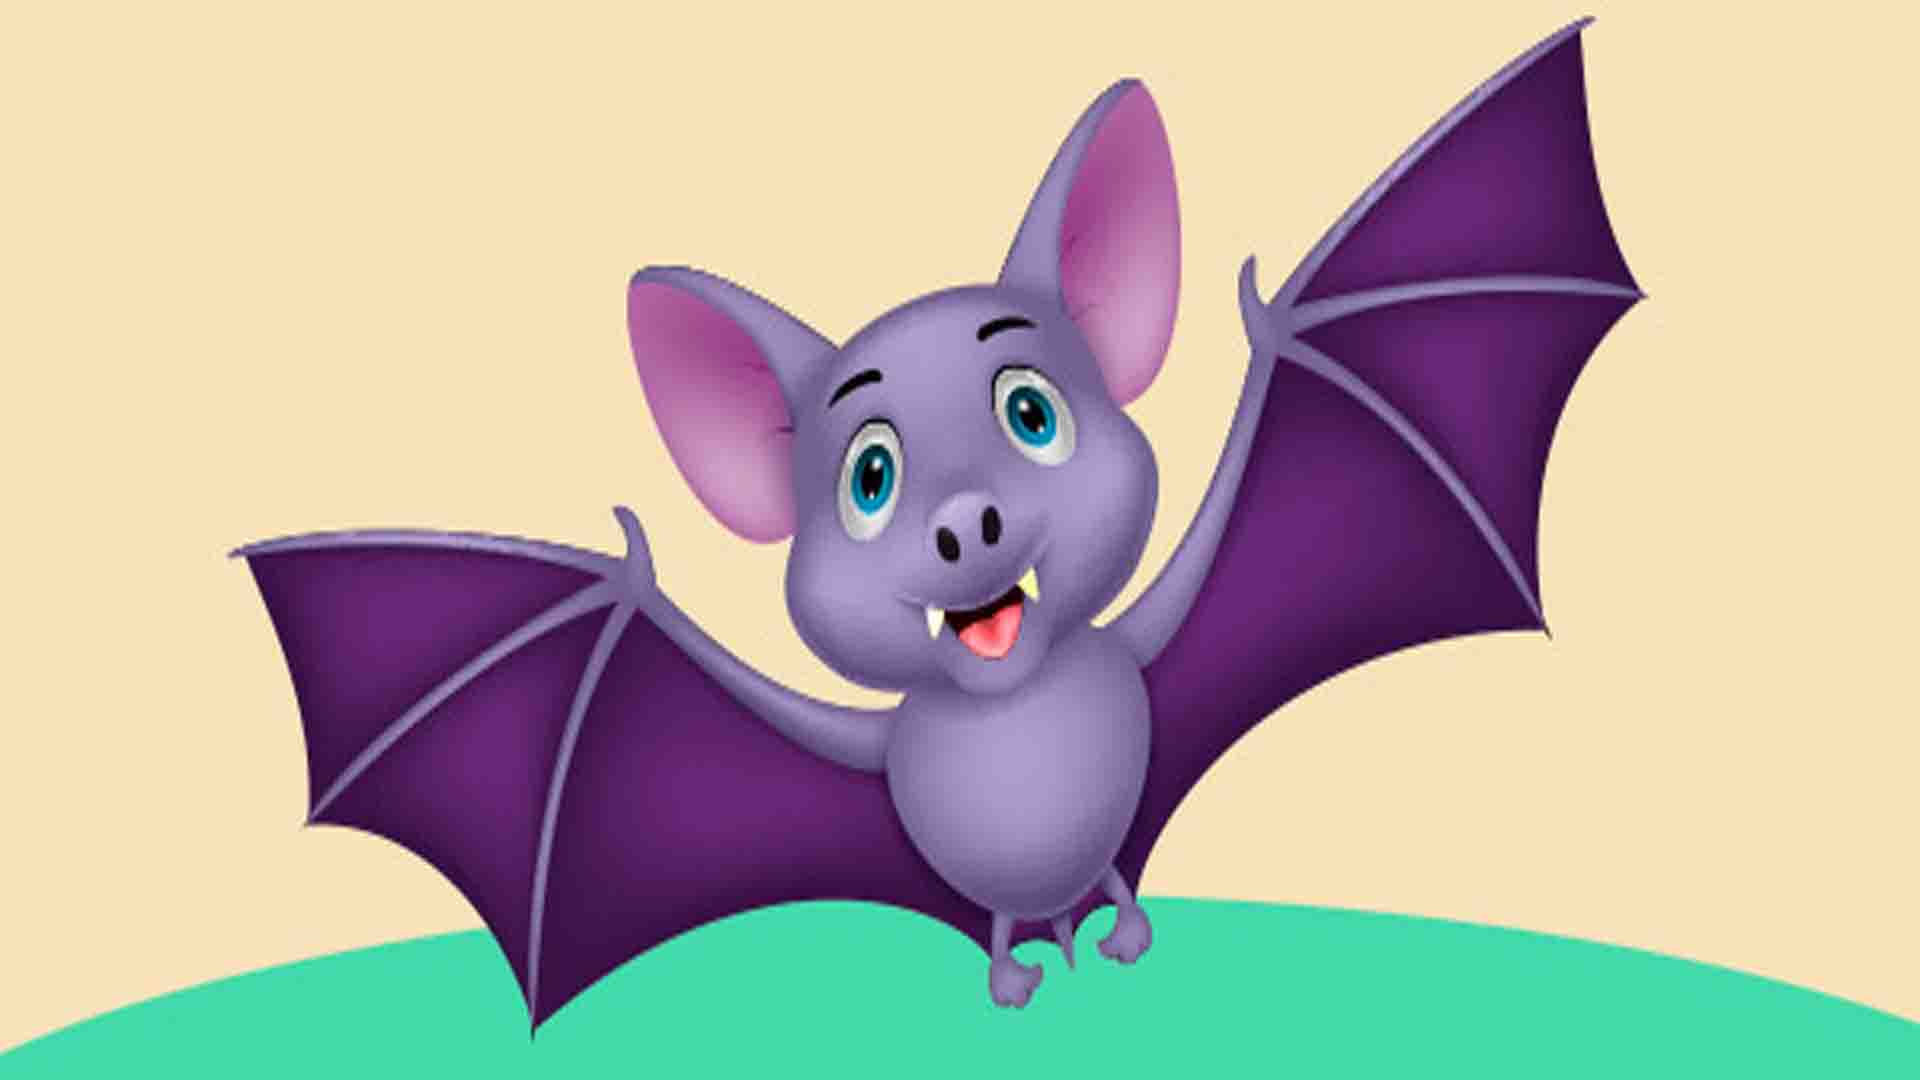 The king and the bat short stories in English | Story for Kids